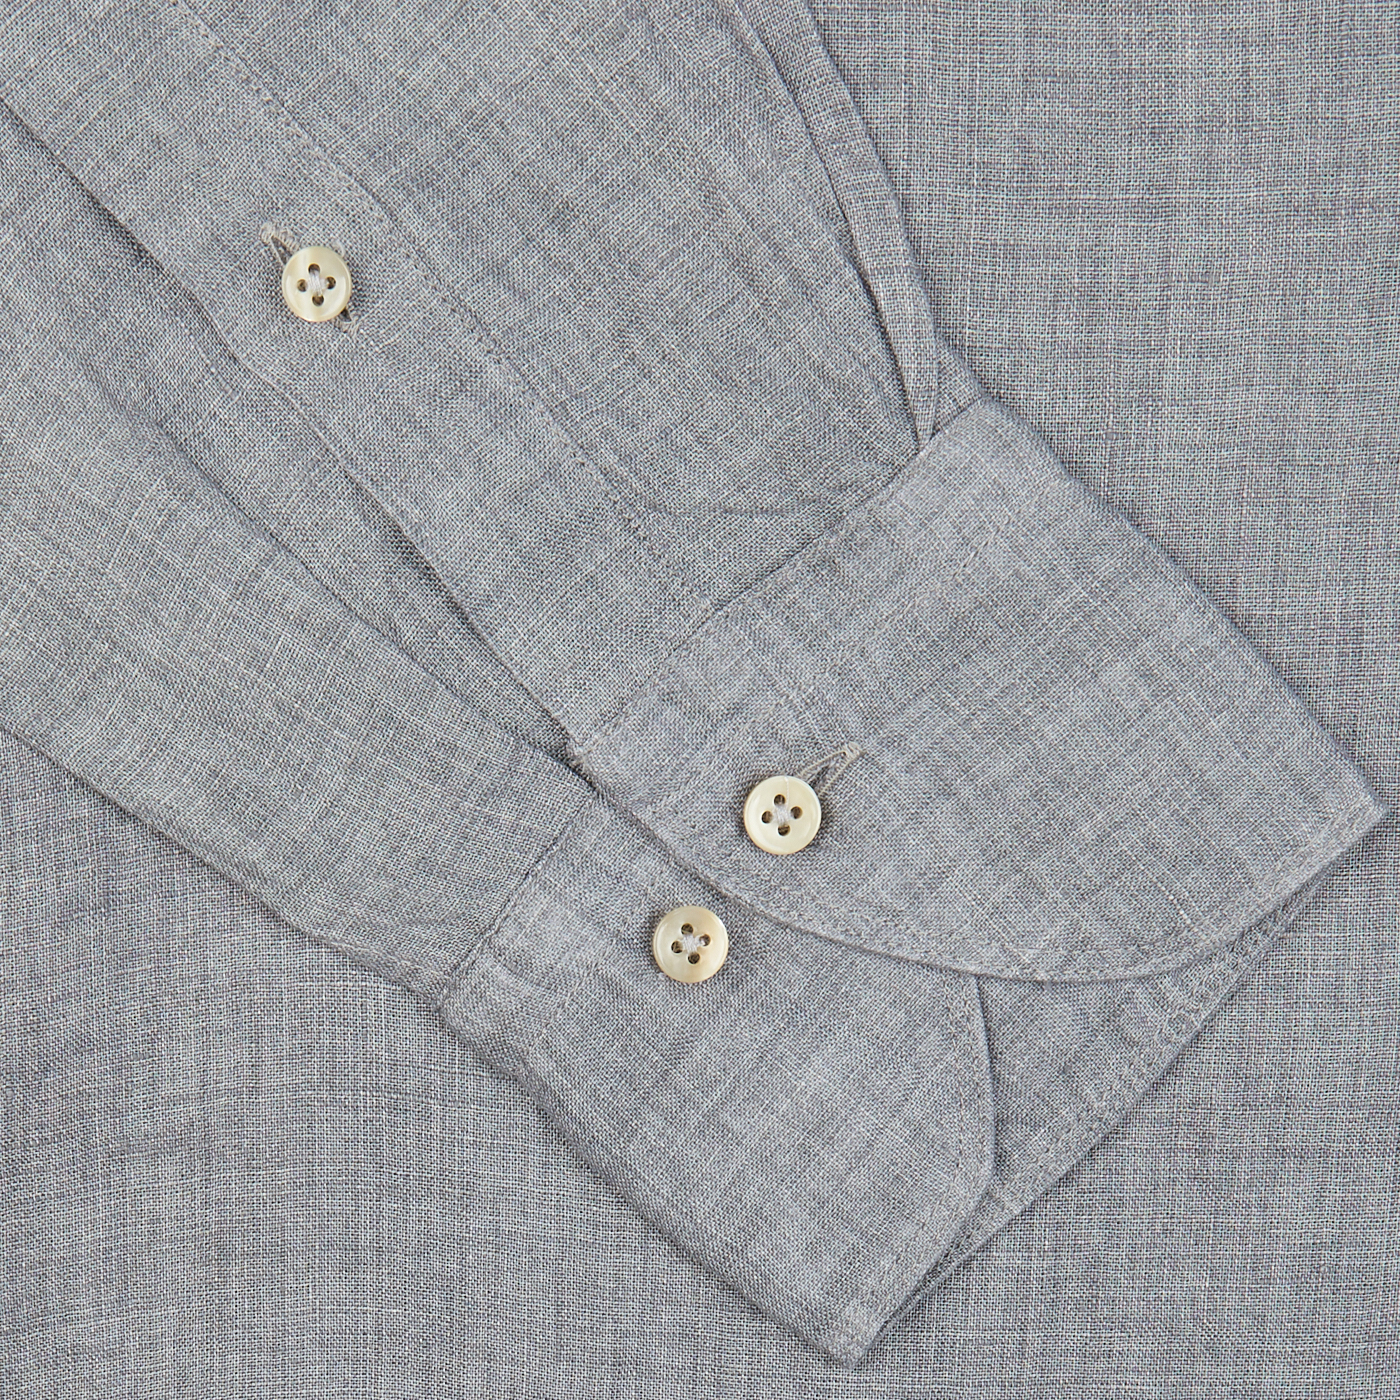 Close-up of a grey Stenströms Slimline cut suit jacket sleeve with buttons.